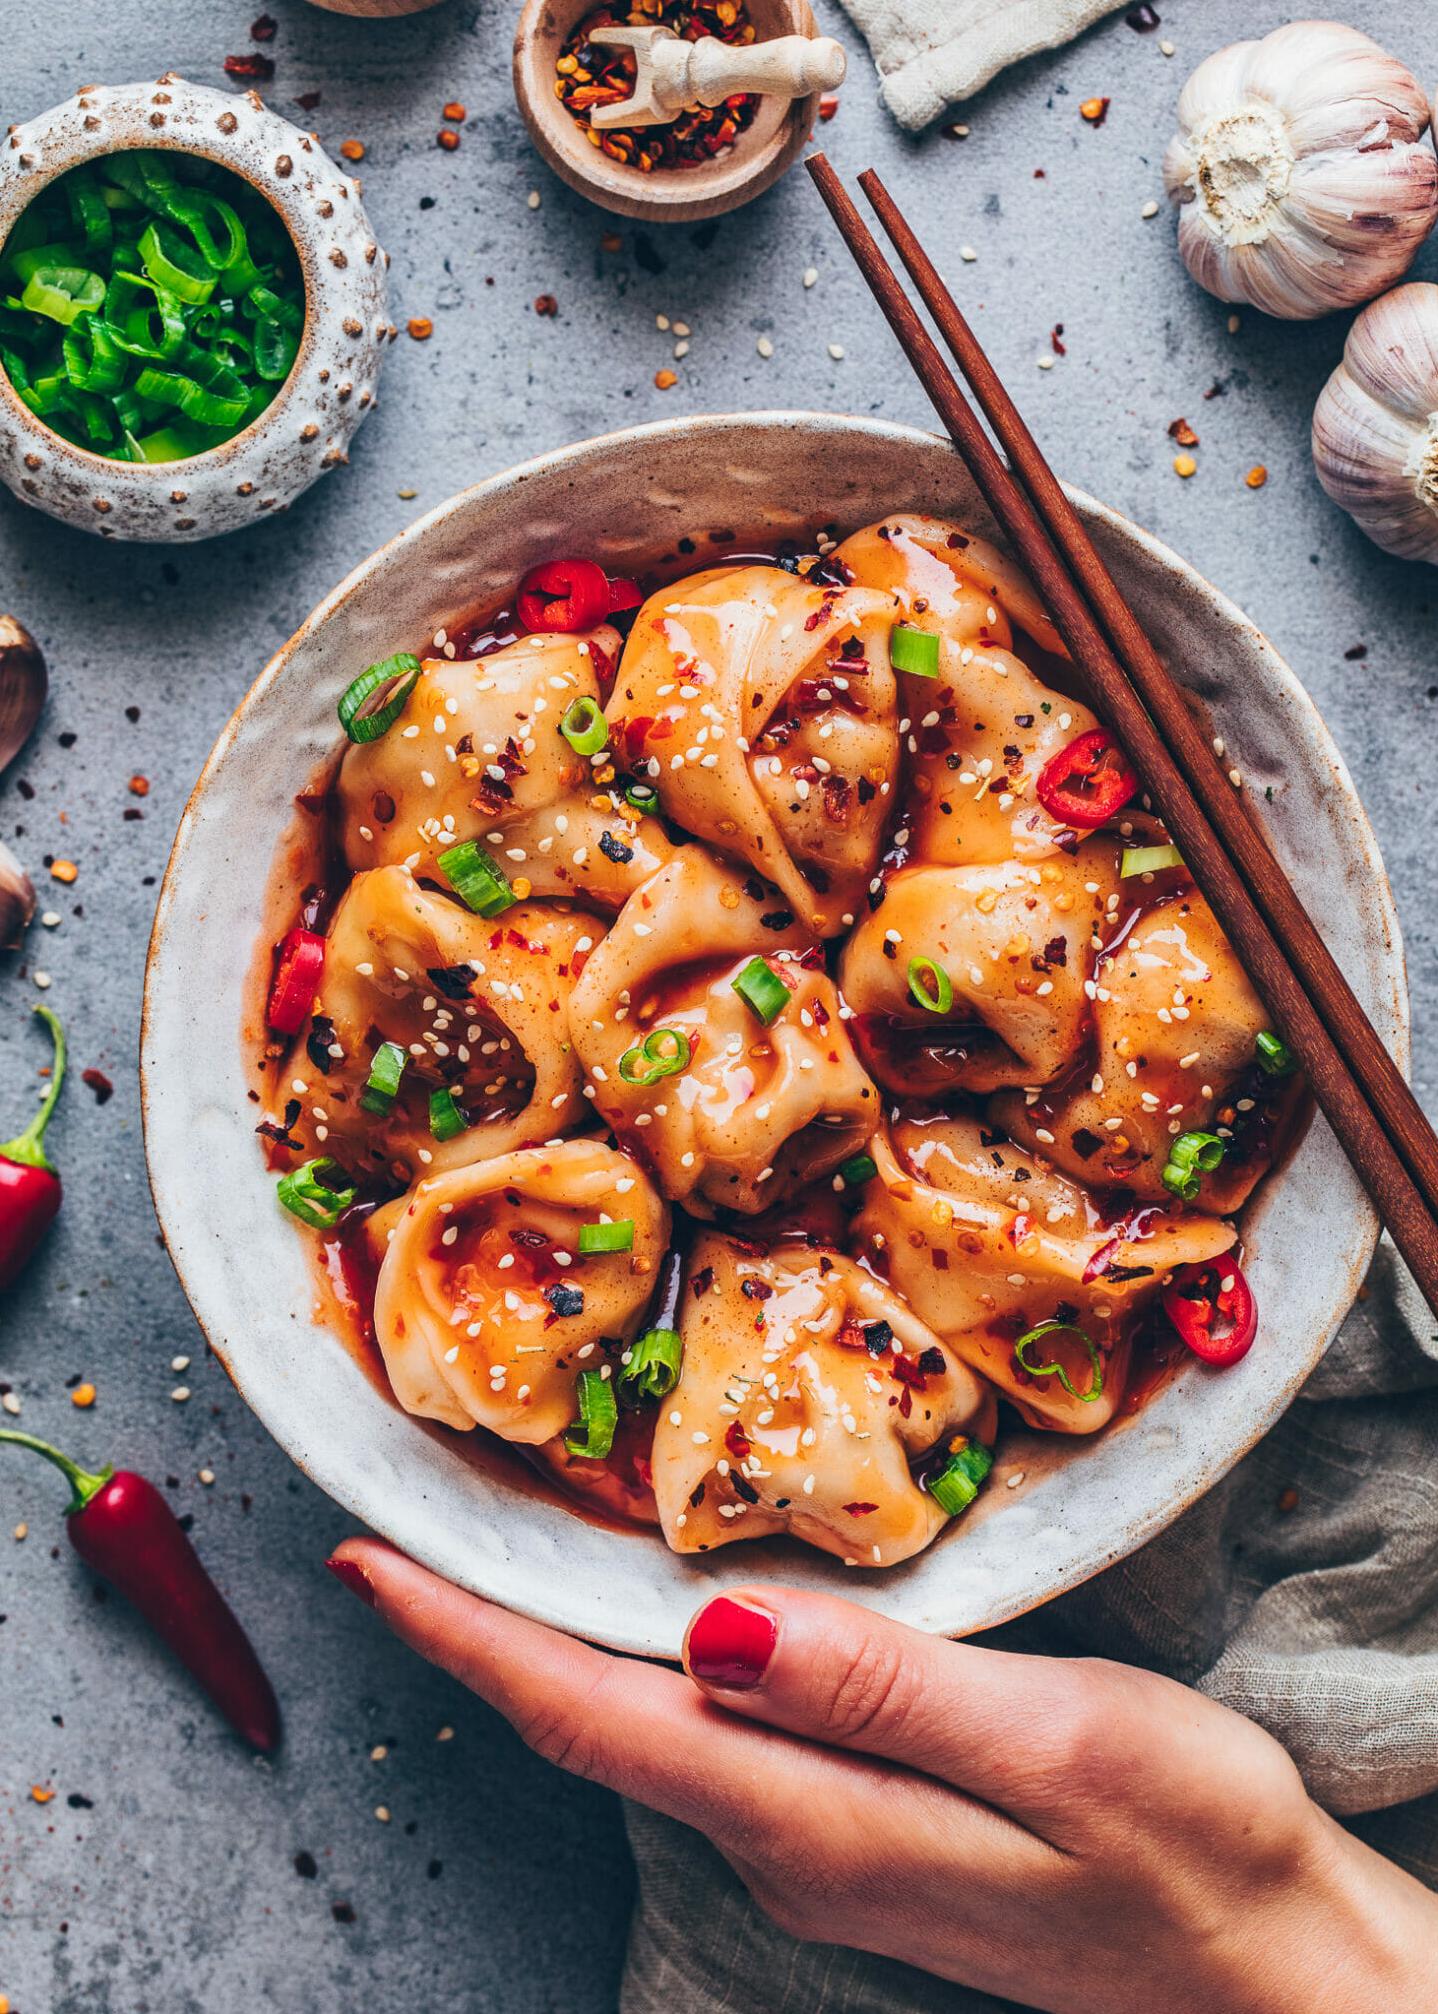  With their crispy exteriors and perfectly cooked interiors, these dumplings are sure to impress.